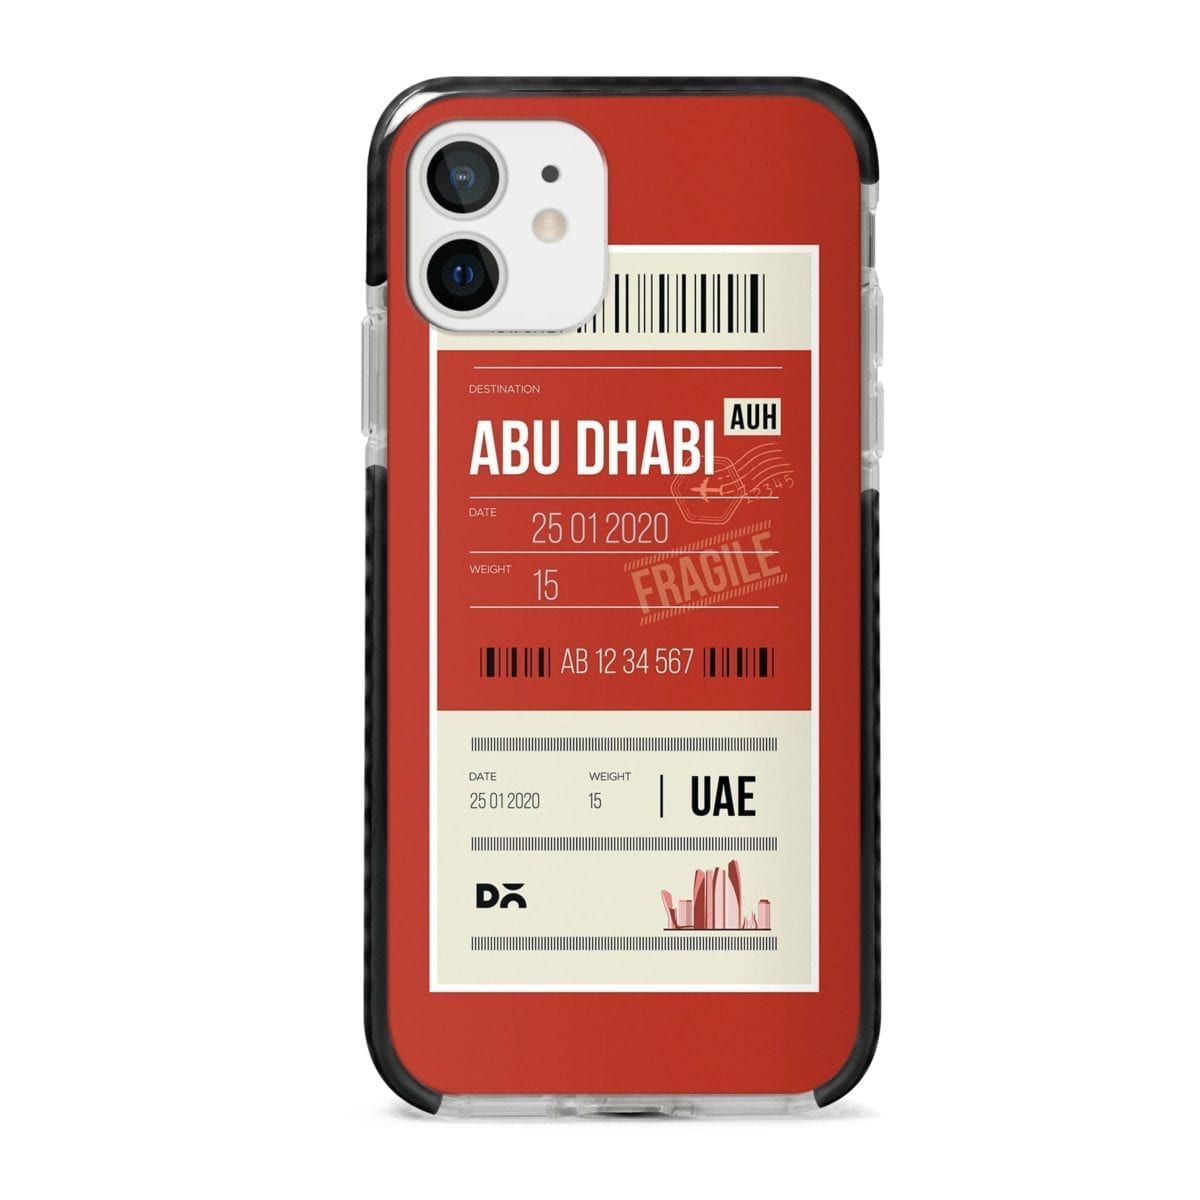 Abu Dhabi Case Cover for Apple iPhone 12 Mini and Apple iPhone 12 with great design and shock proof | Klippik | Online Shopping | Kuwait UAE Saudi